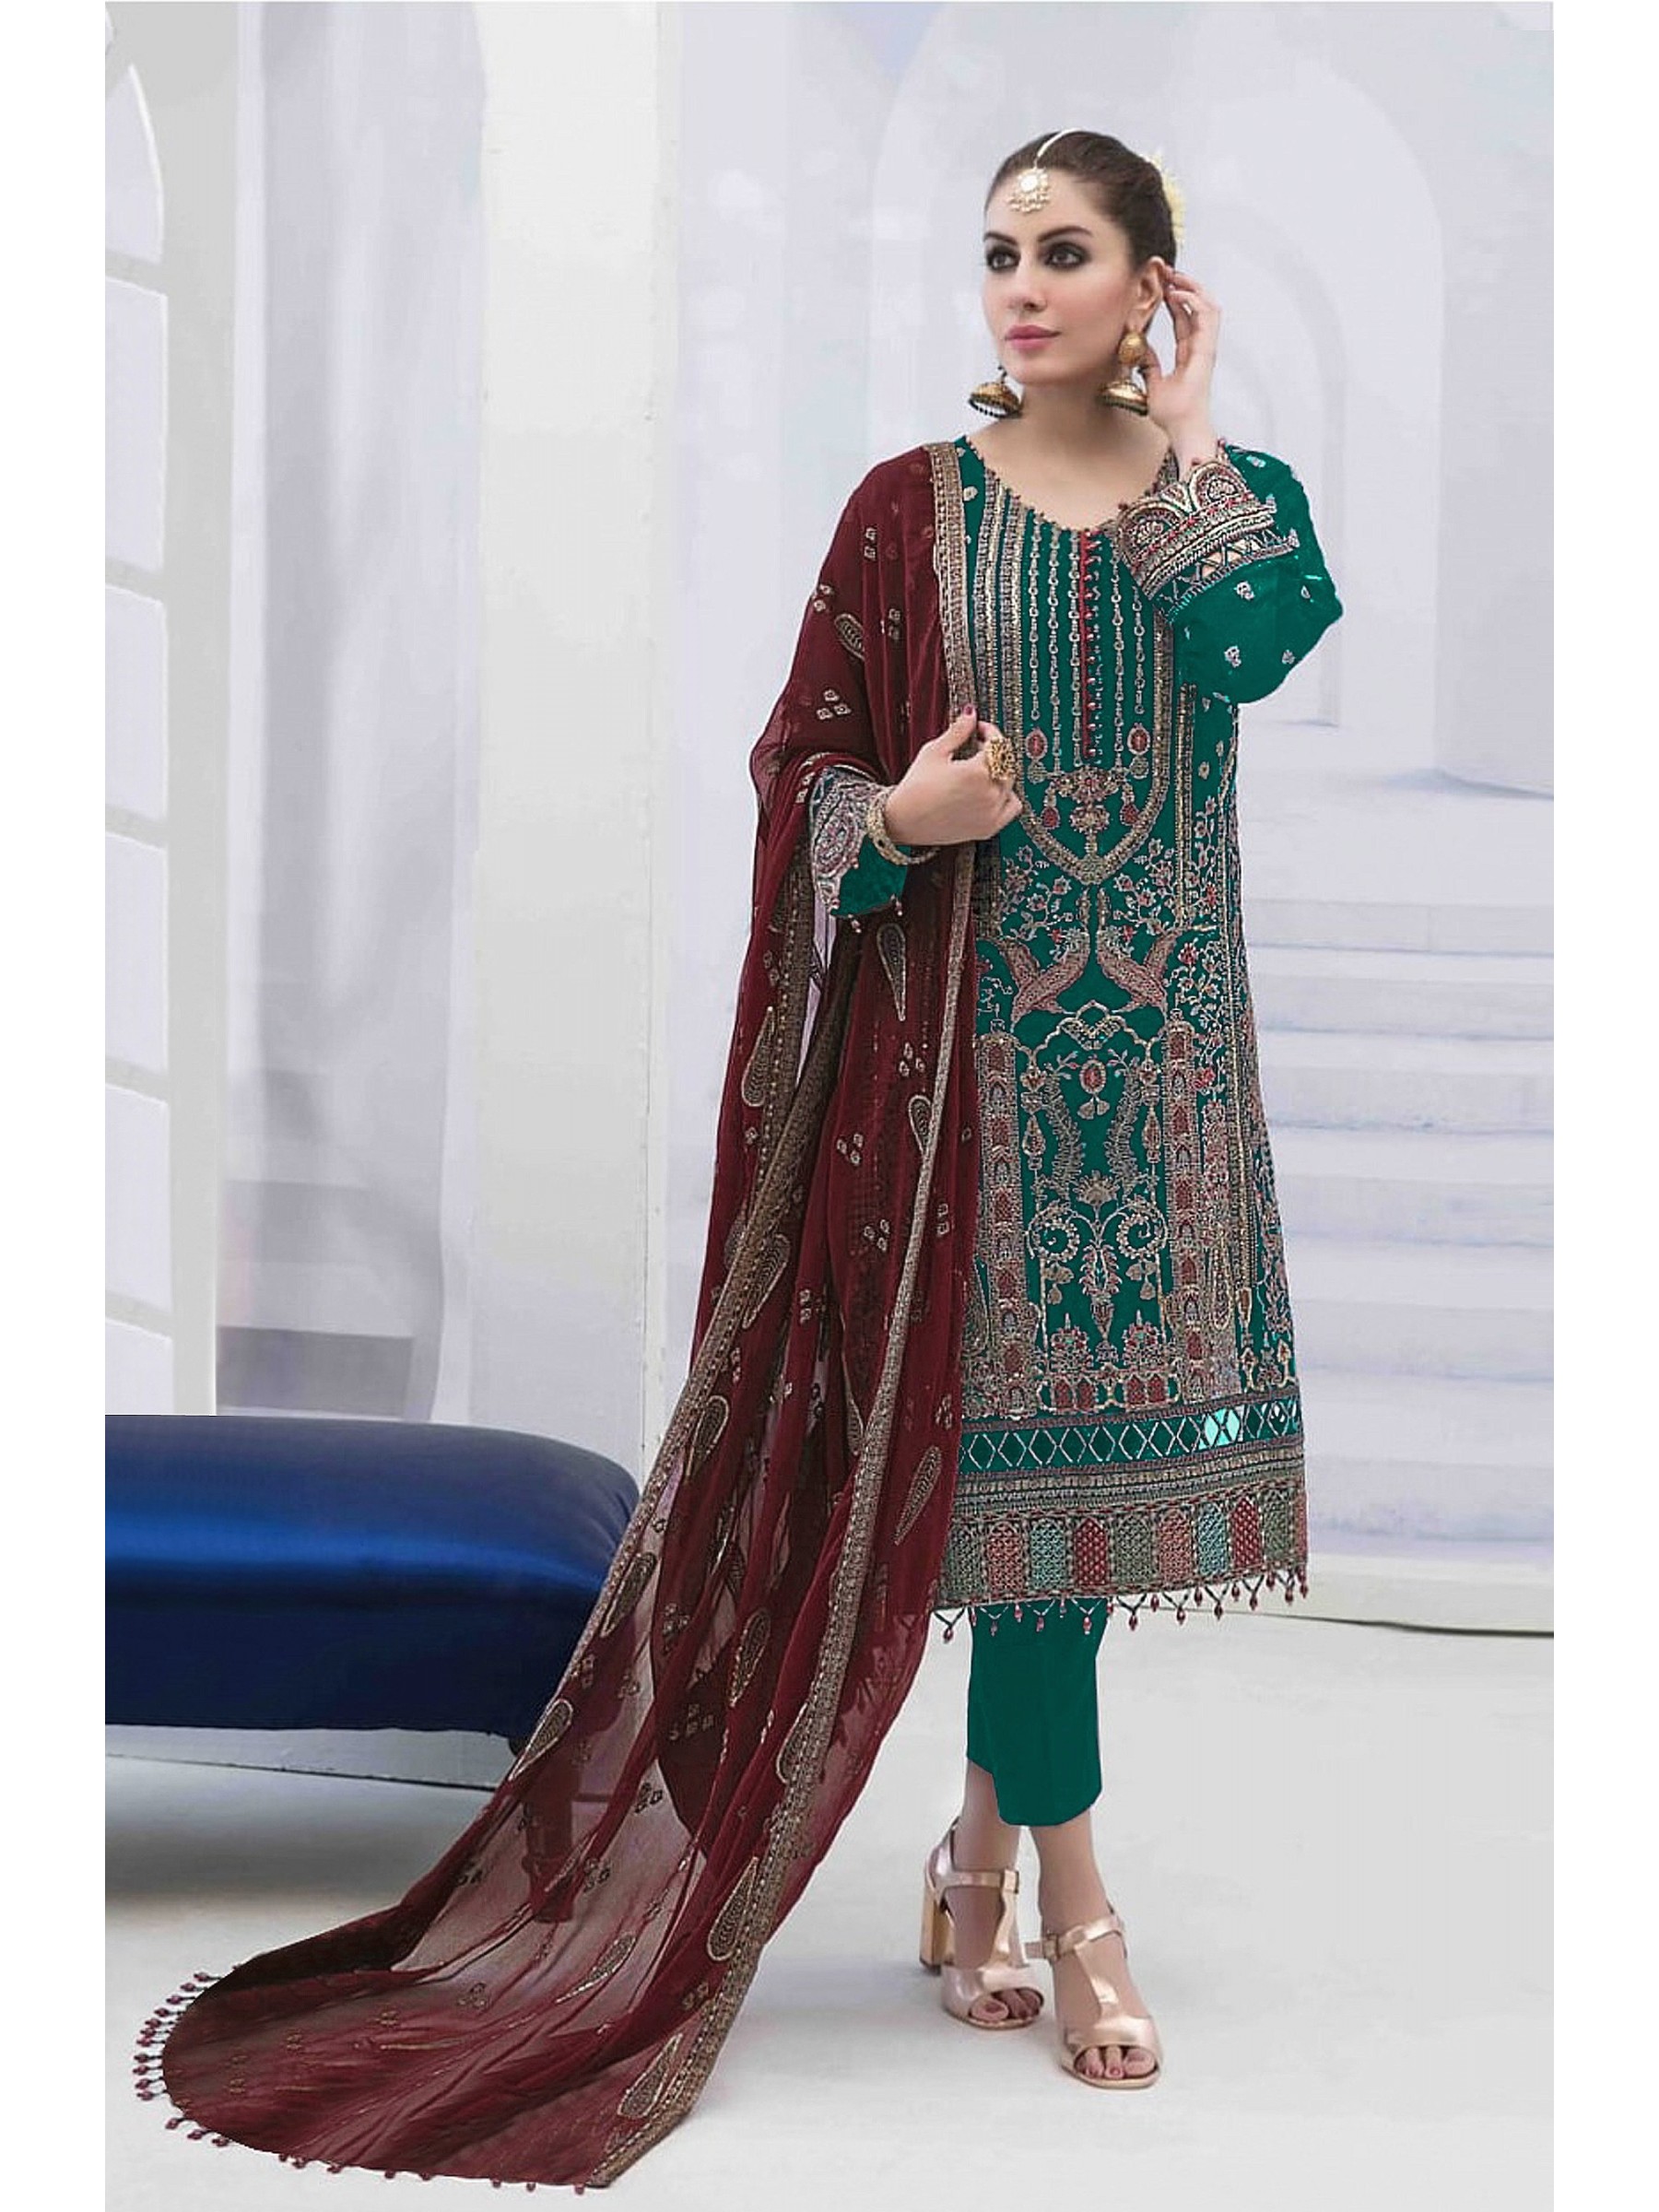 Georgette Silk Party Wear Suit in Green Color with Embroidery Work